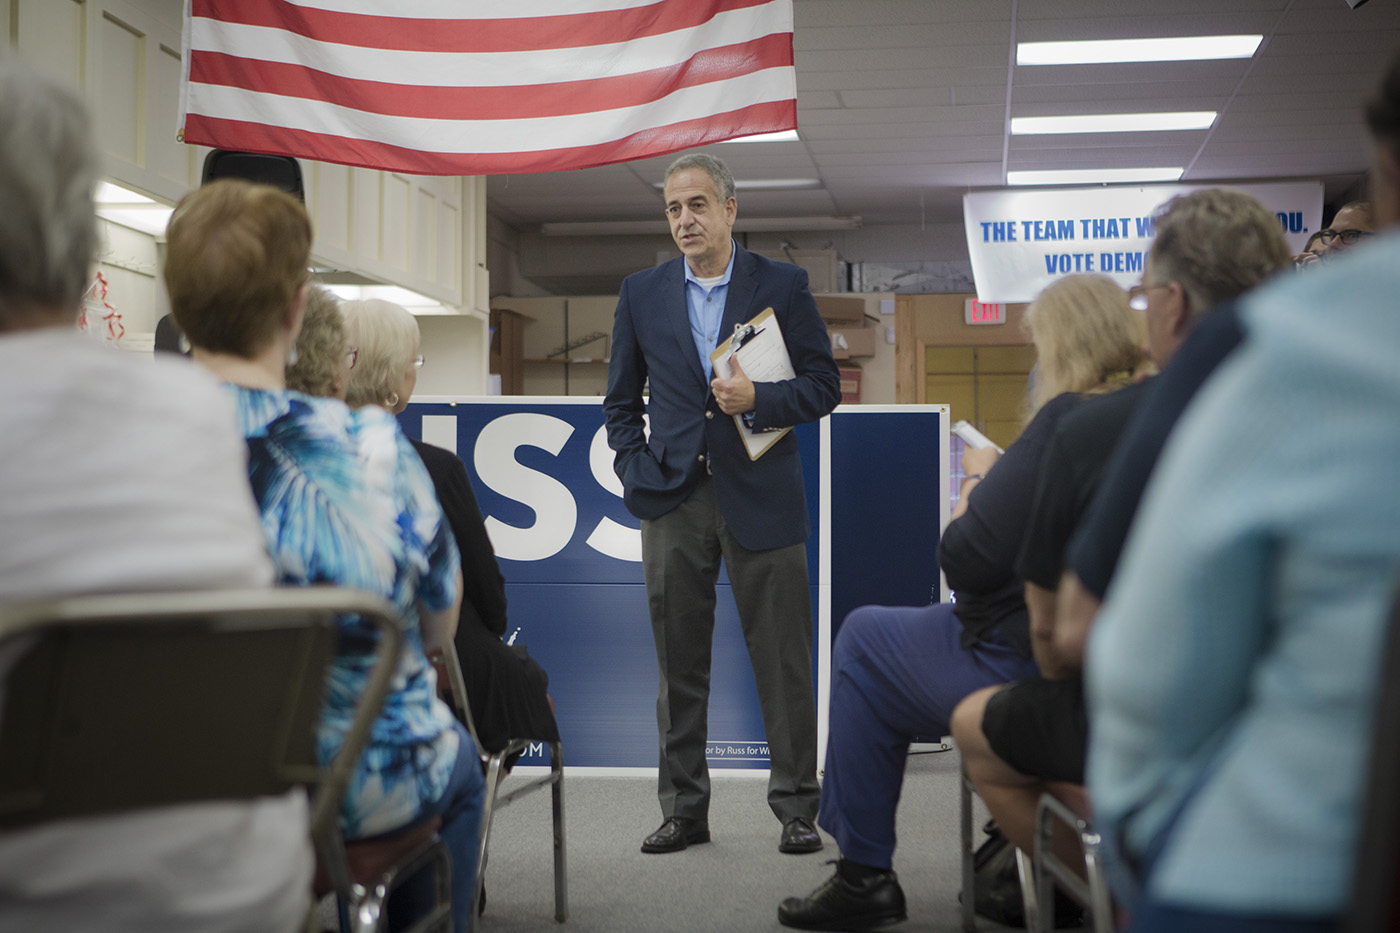 Russ Feingold - GOTV Event for Early Voting